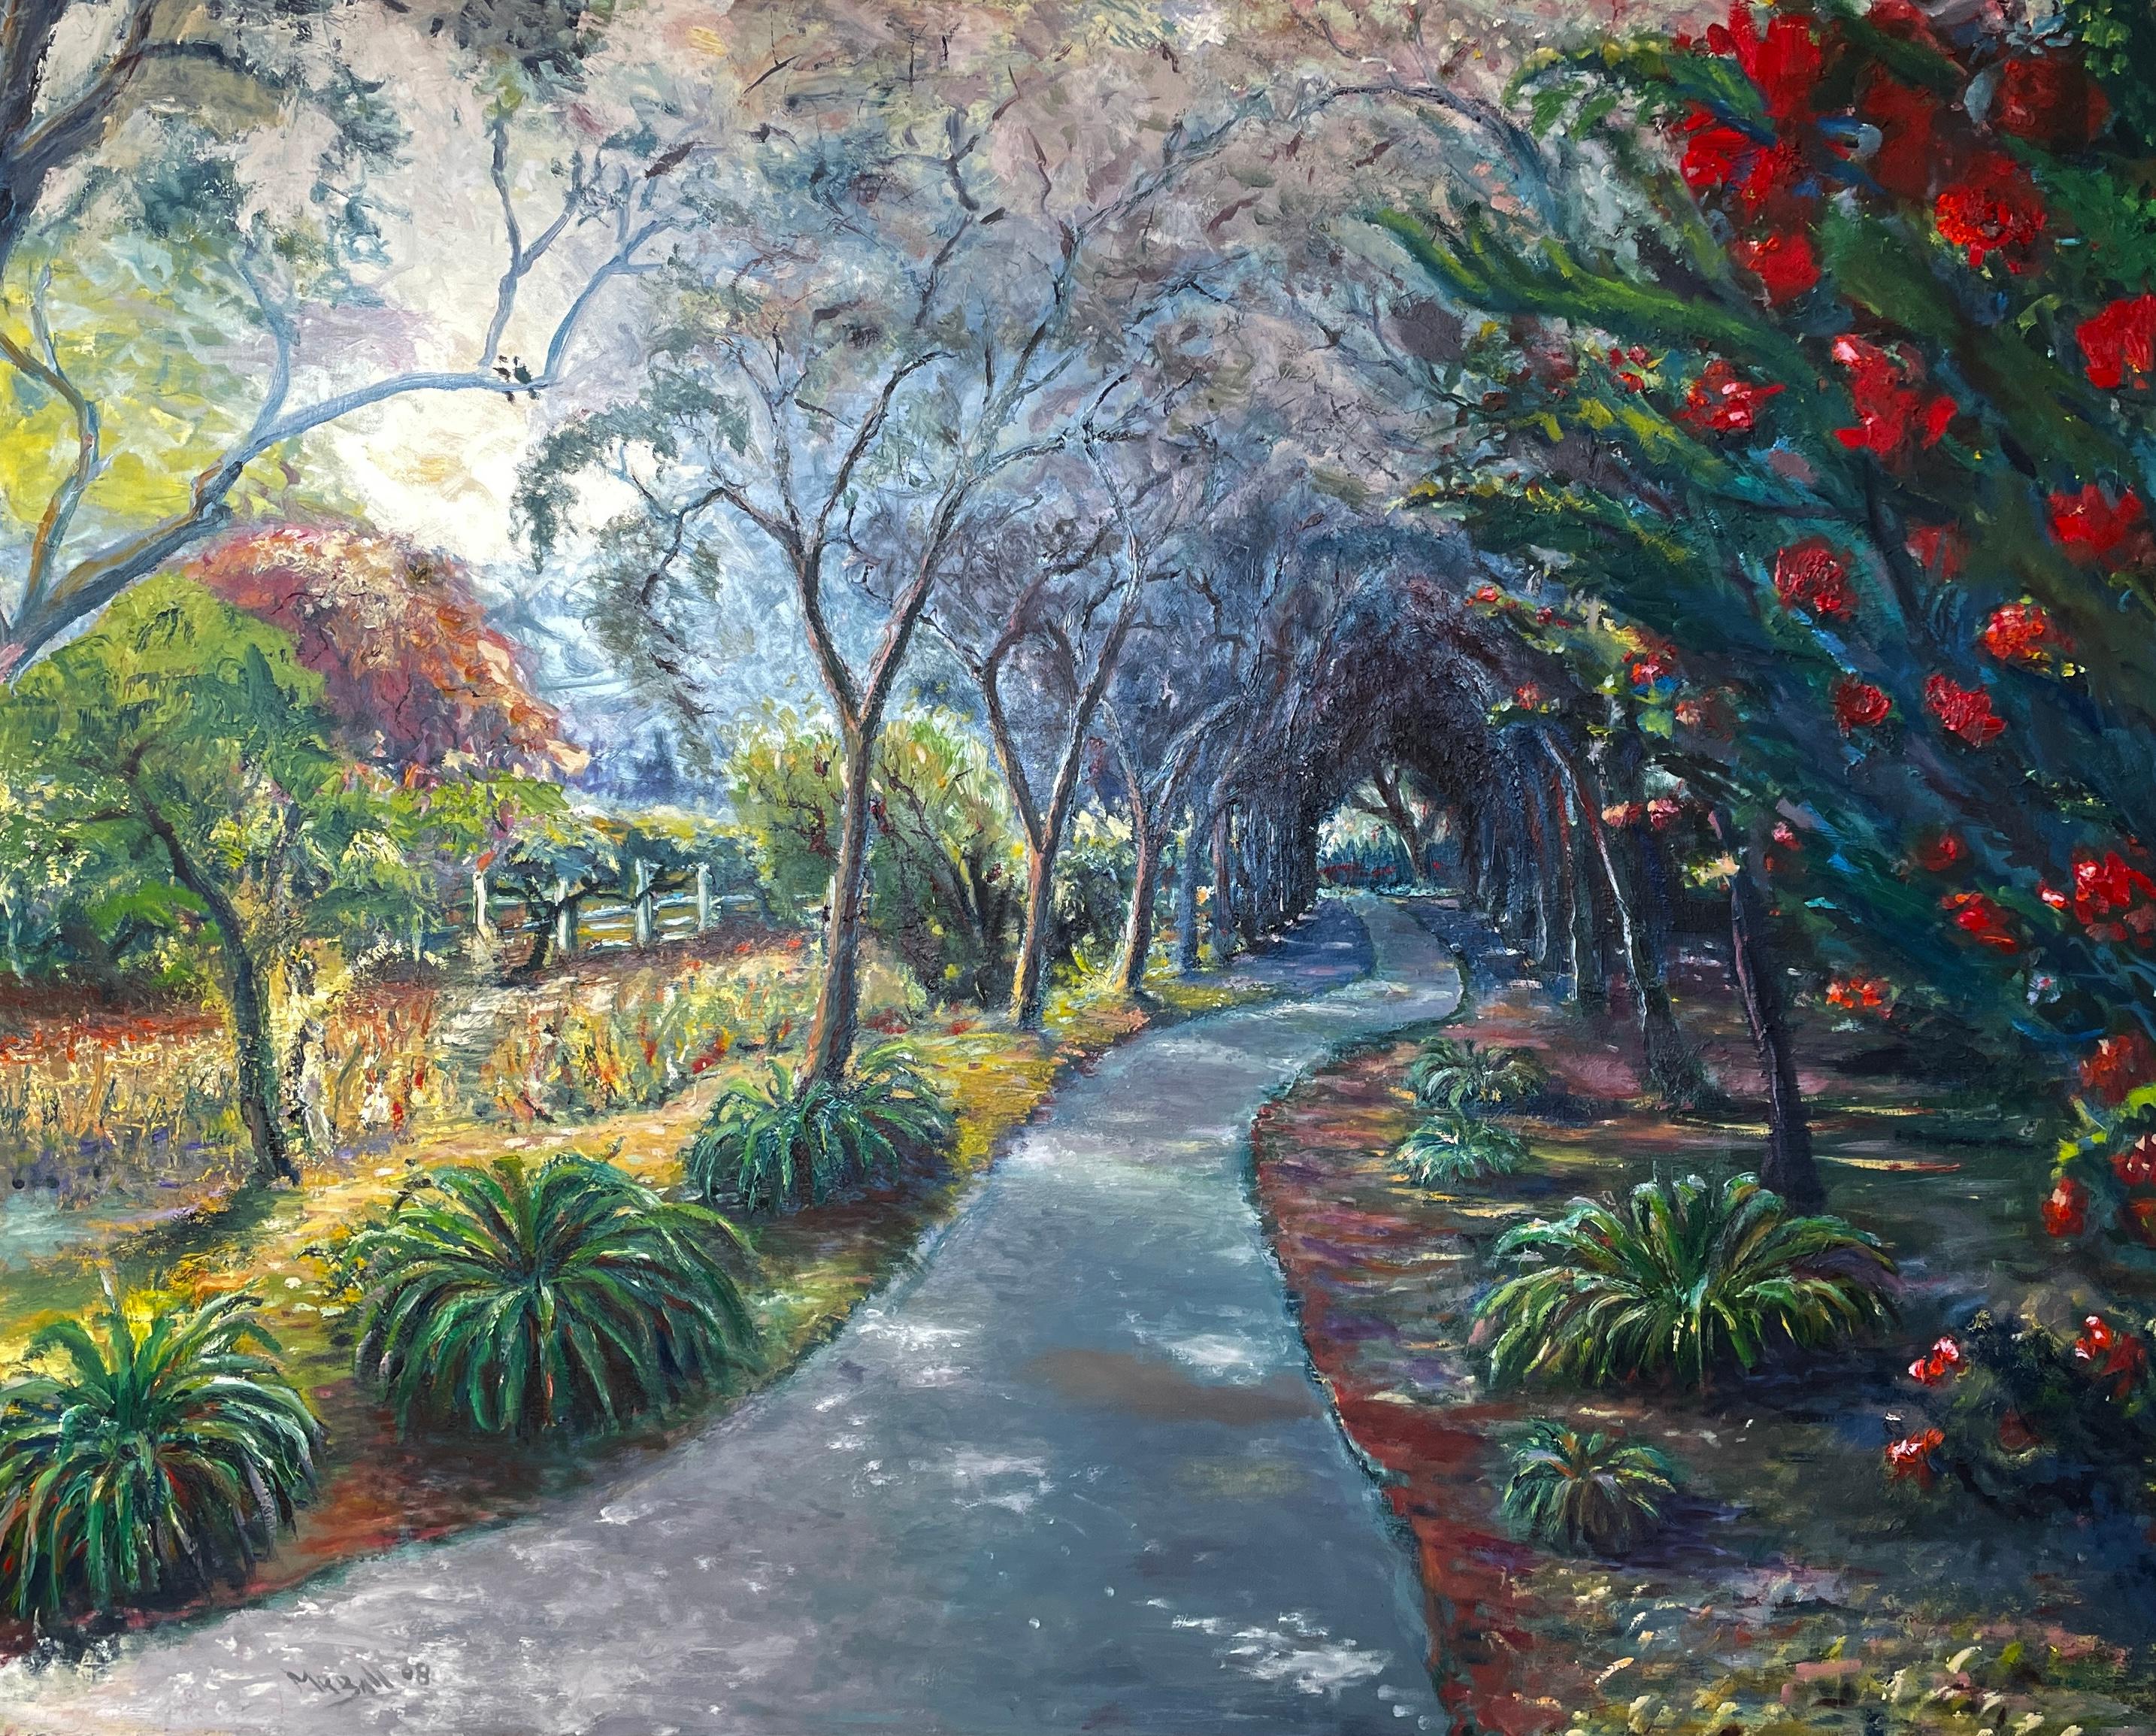 "The Curvy Path," a 48" x 60" oil on canvas by Mike Ball, captures the serene beauty of a garden walkway. This contemporary landscape is painted with a harmonious palette of greens, reds, and earth tones, contrasting with the soft greys and blues of